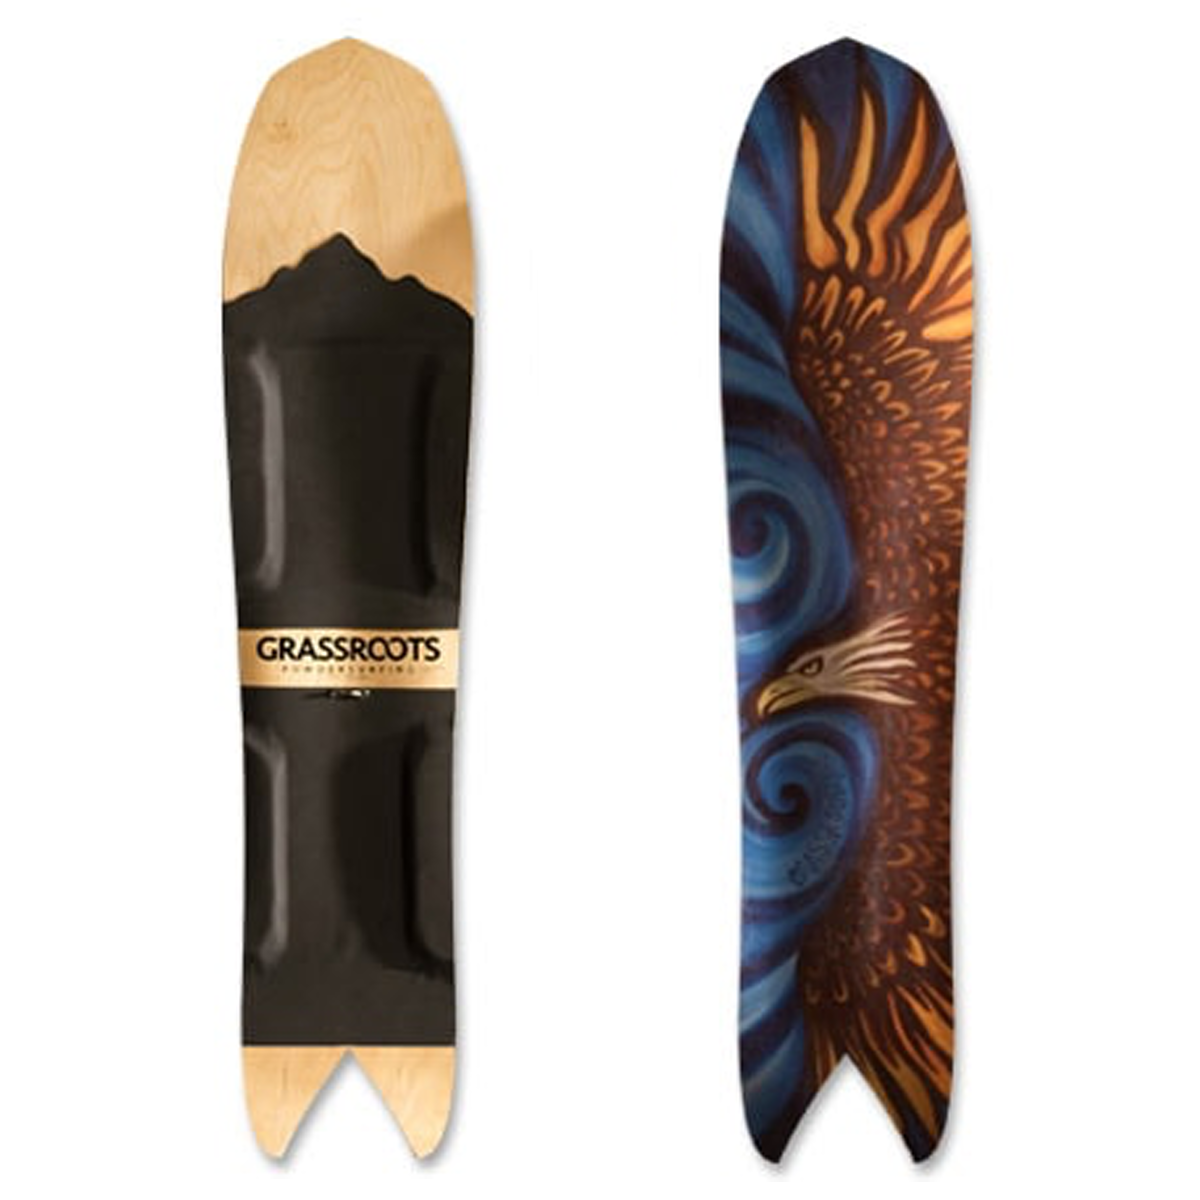 Grassroots Stealth Pow Surfer - 145